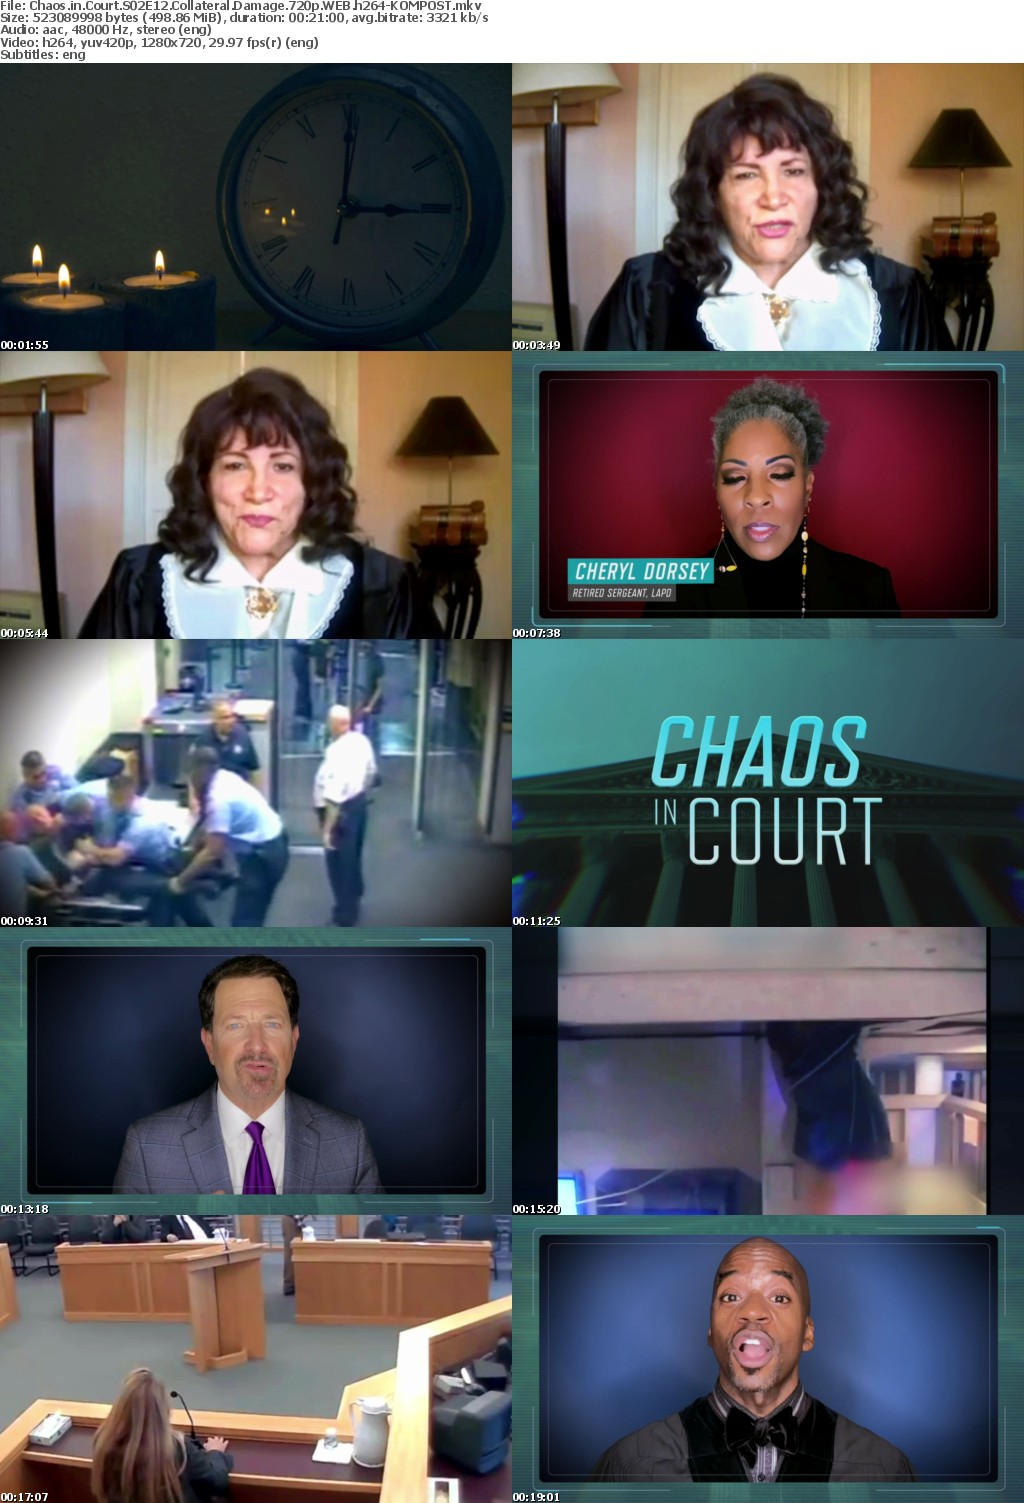 Chaos in Court S02E12 Collateral Damage 720p WEB h264-KOMPOST